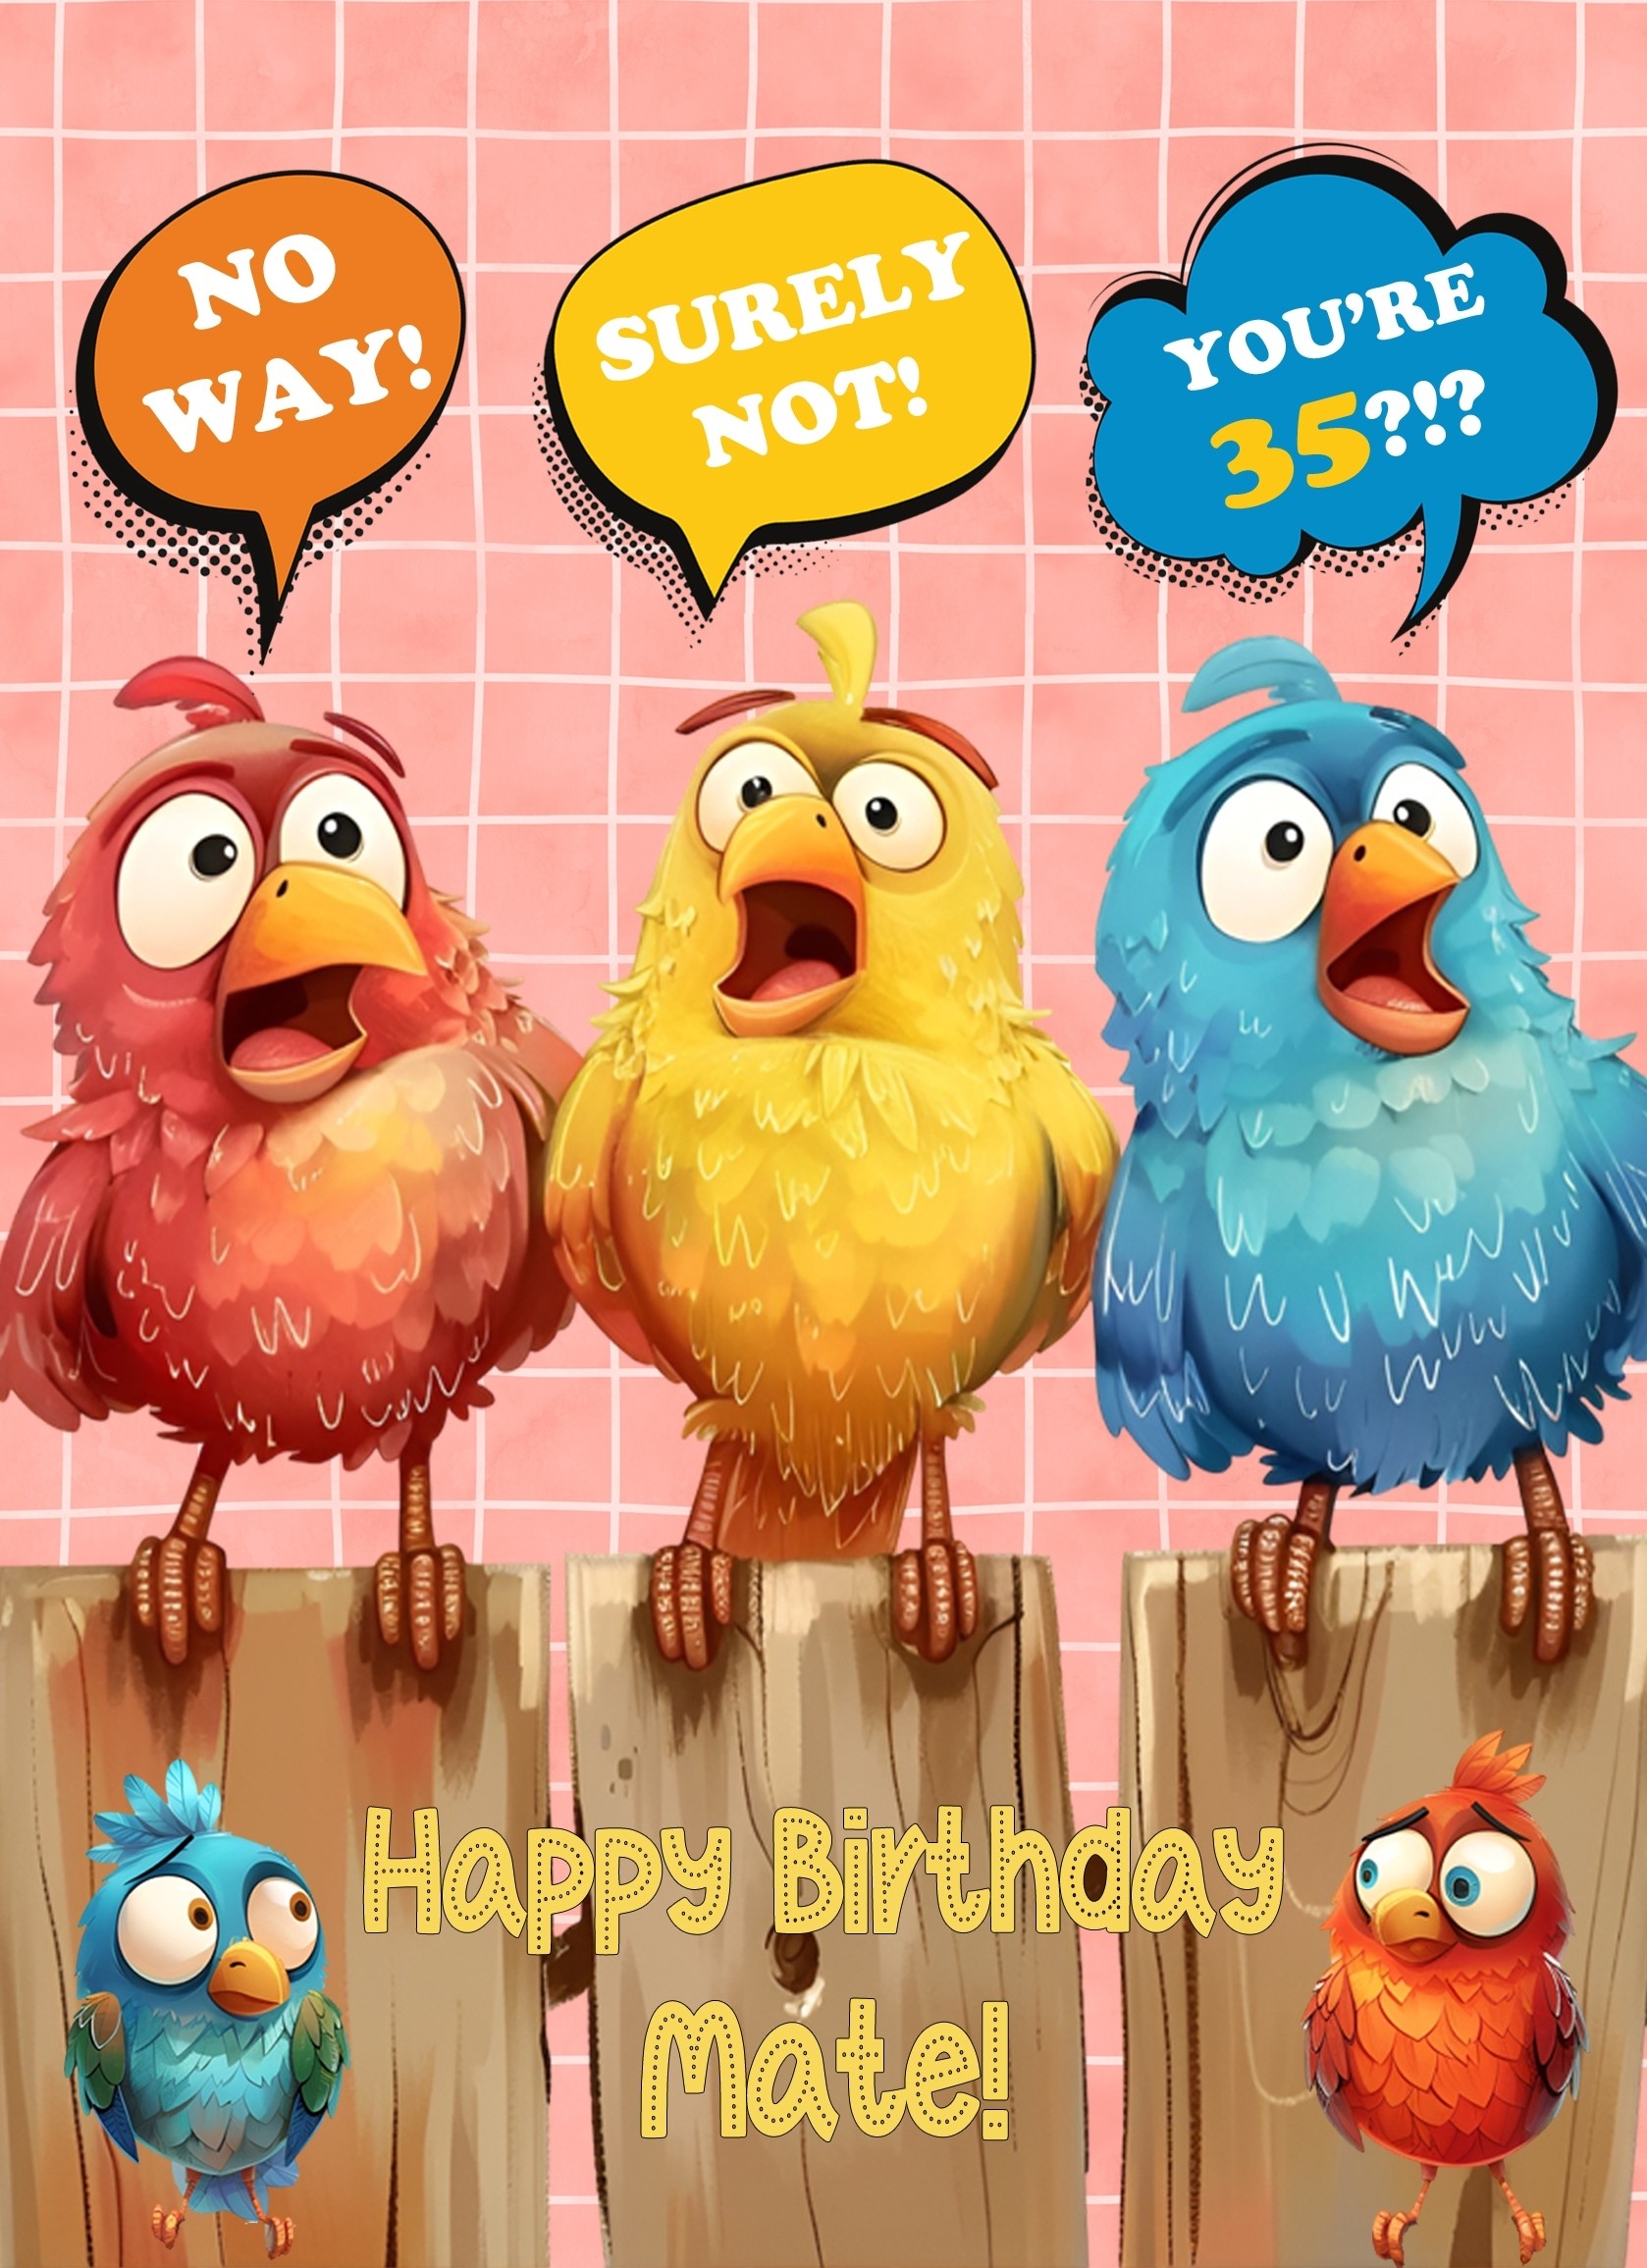 Mate 35th Birthday Card (Funny Birds Surprised)